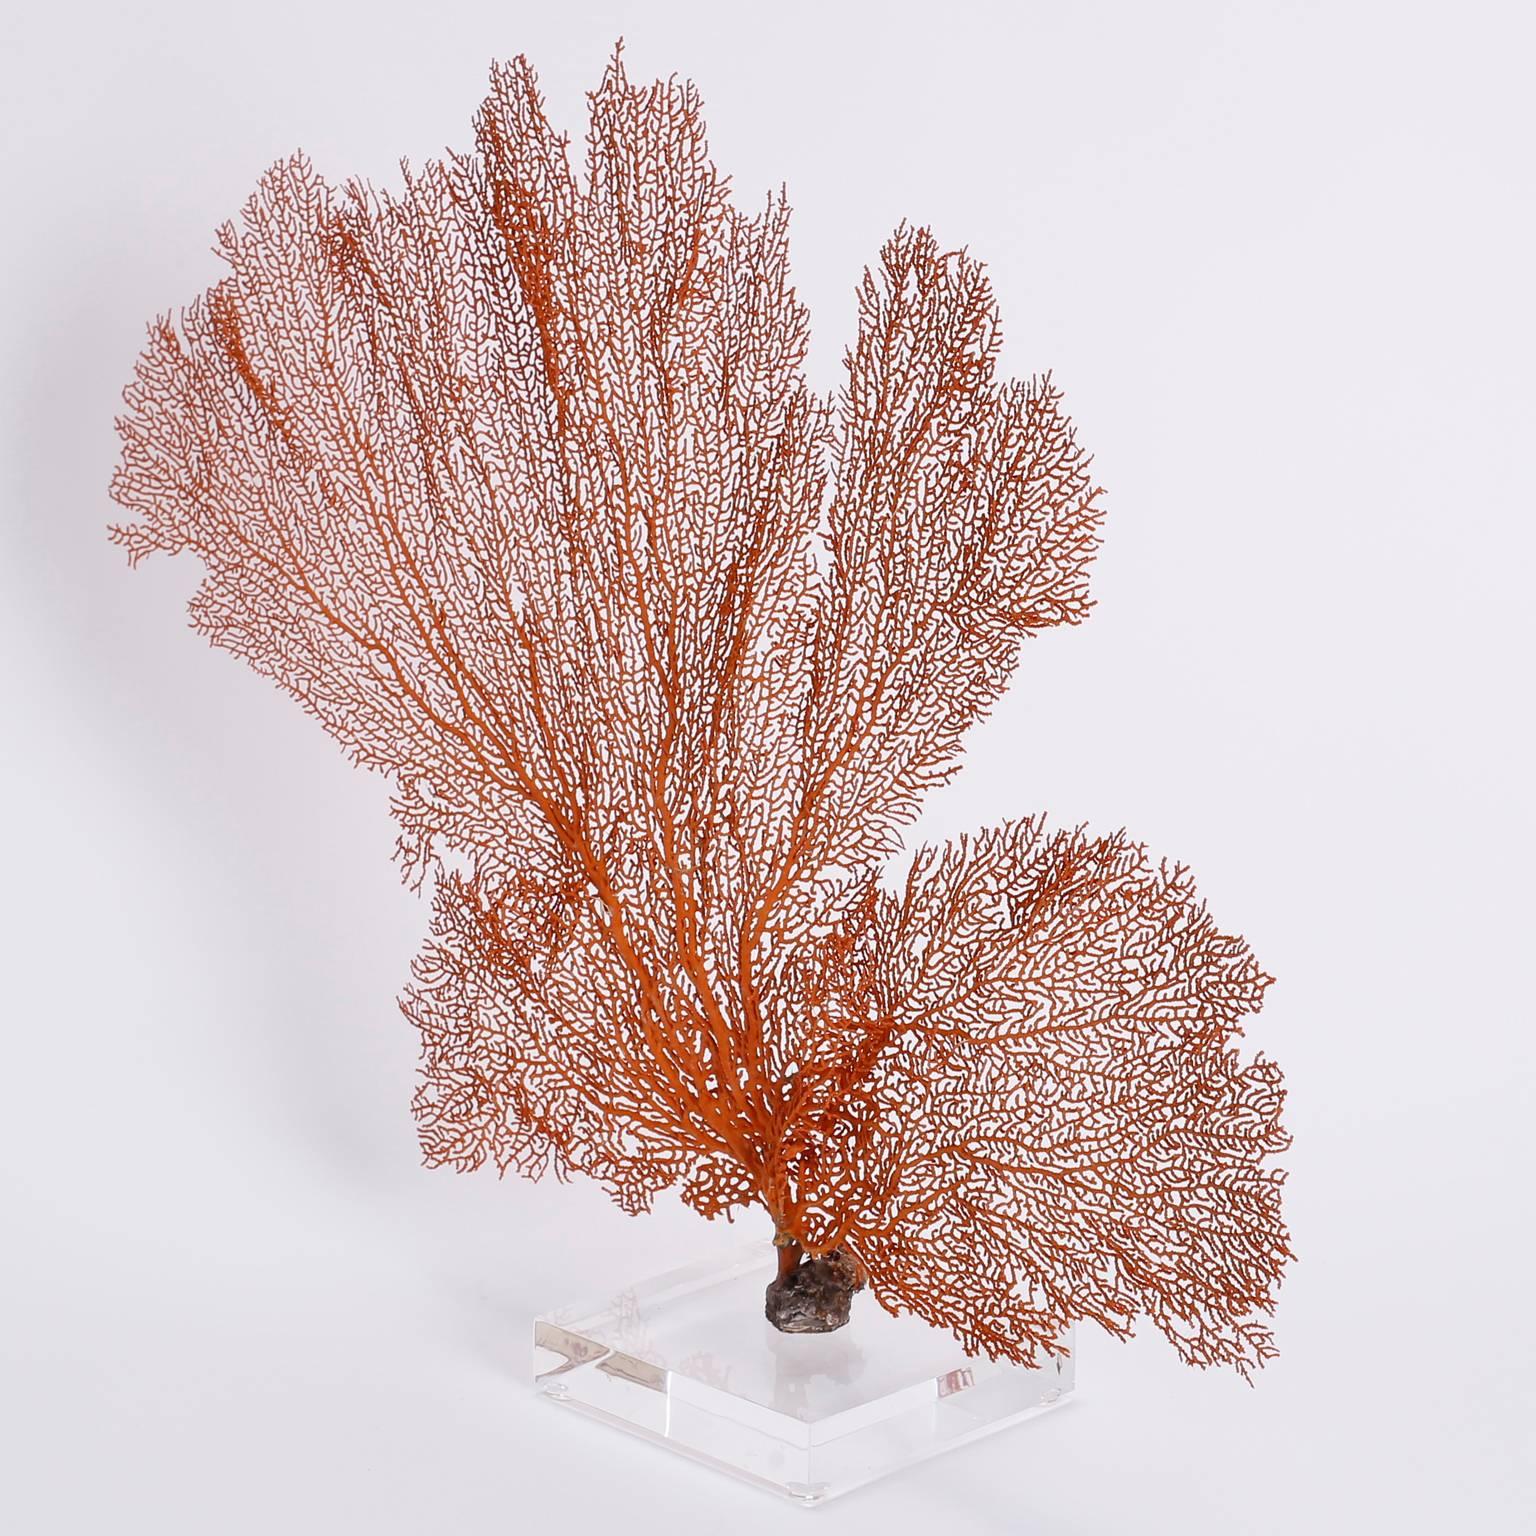 Orange sea fan specimen with a lush pattern of development. Presented on a Lucite stand to enhance the sculptural form.